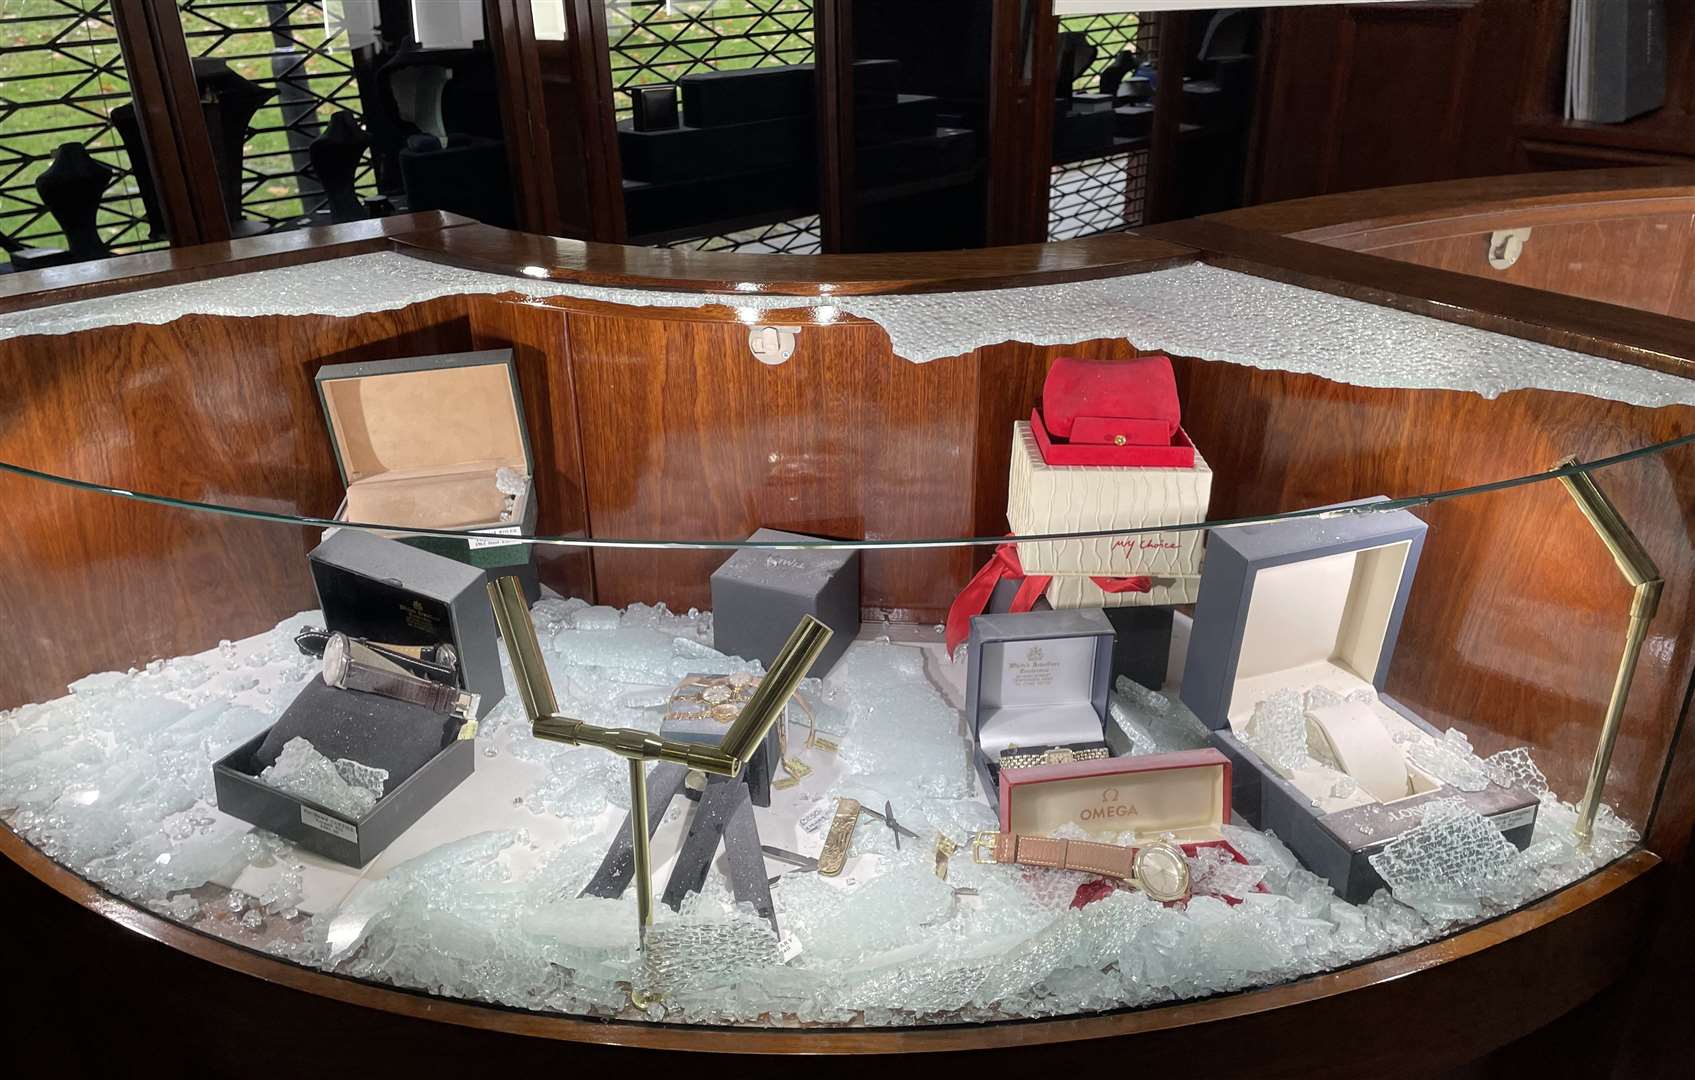 Hundreds of thousands of pounds worth of jewellery was stolen